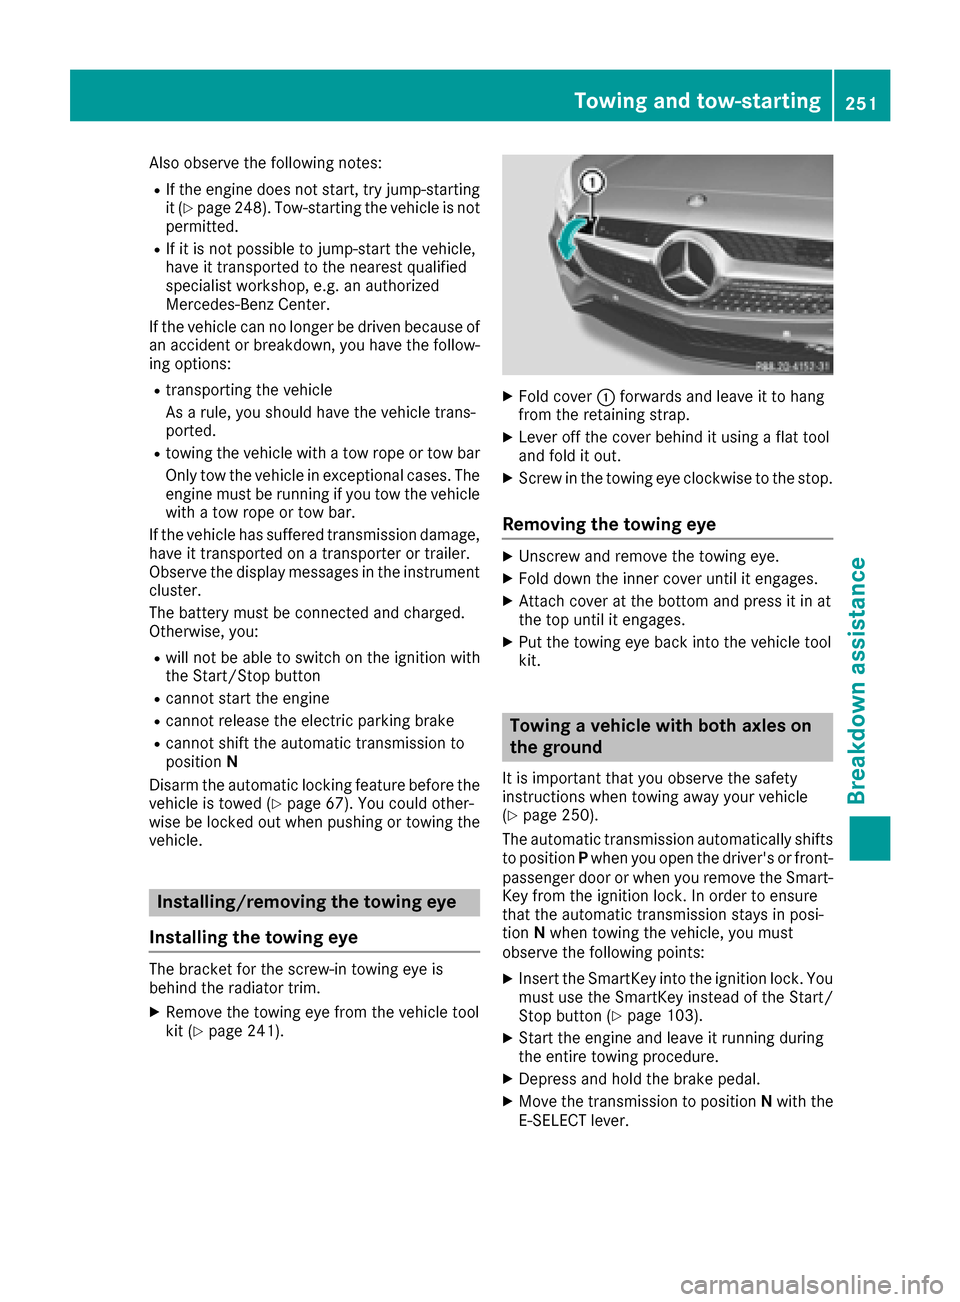 MERCEDES-BENZ AMG GT S 2016 C190 User Guide Also observe the following notes:
RIf the engine does not start, try jump-starting
it (Ypage 248). Tow-starting the vehicle is not
permitted.
RIf it is not possible to jump-start the vehicle,
have it 